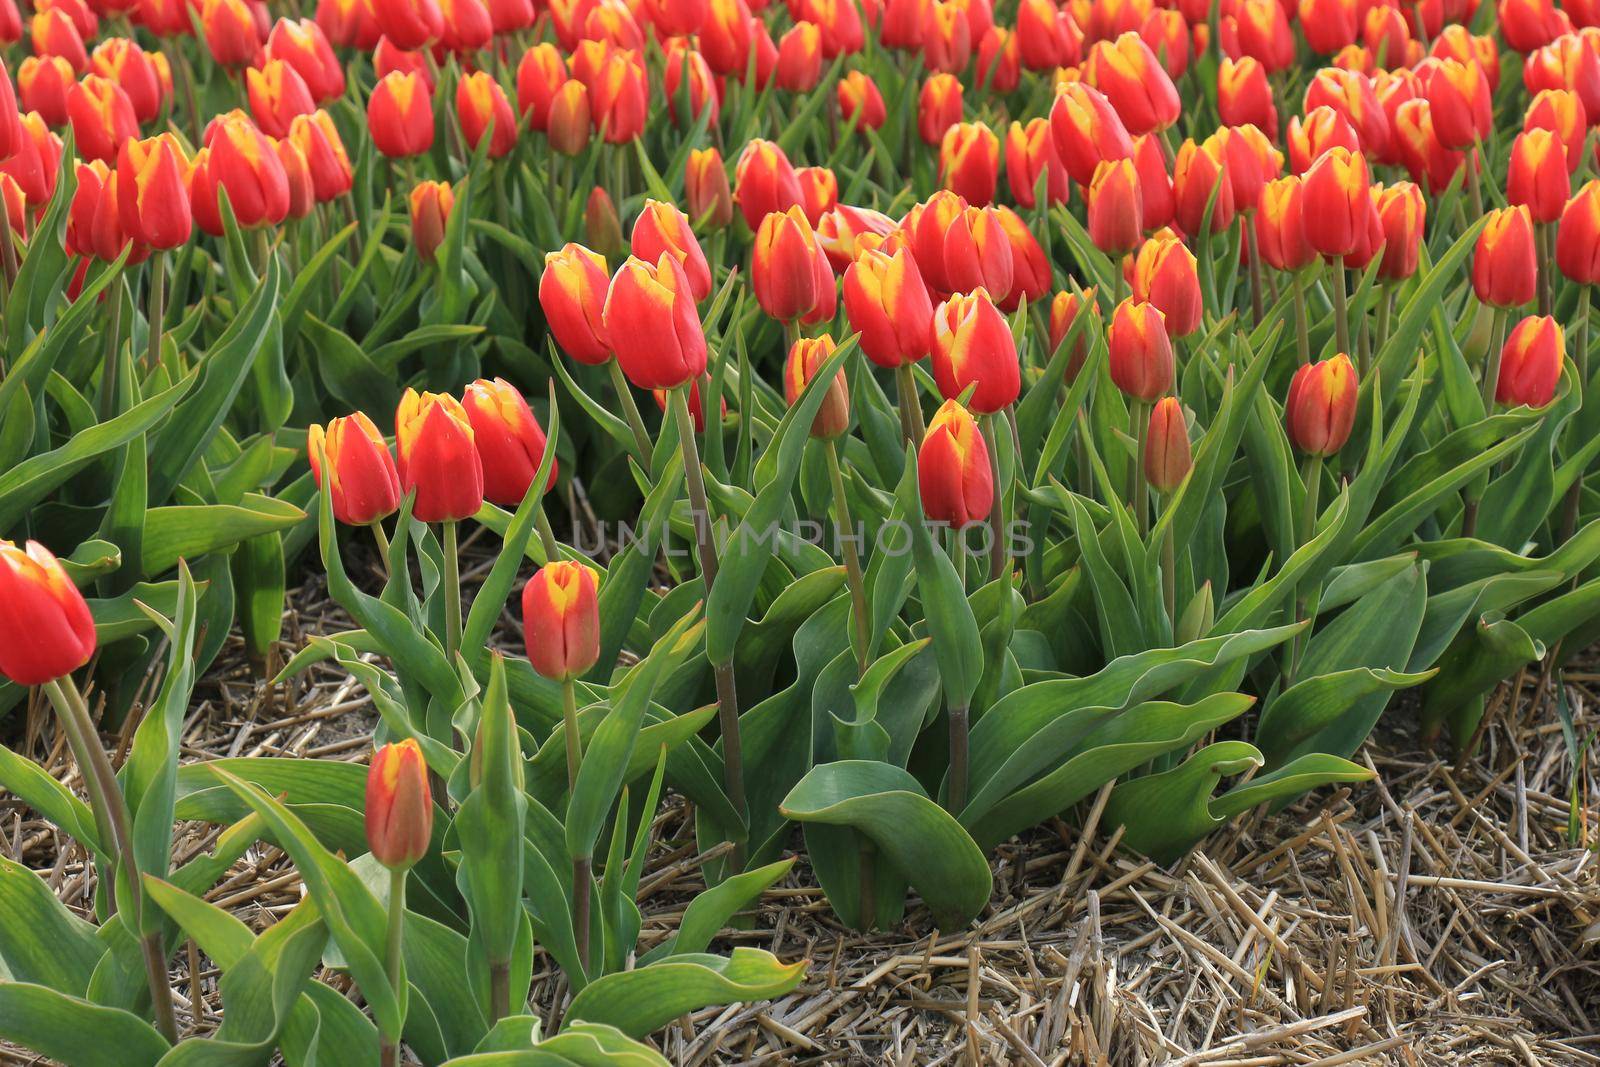 Yellow red tulips in a field: flower bulb industry